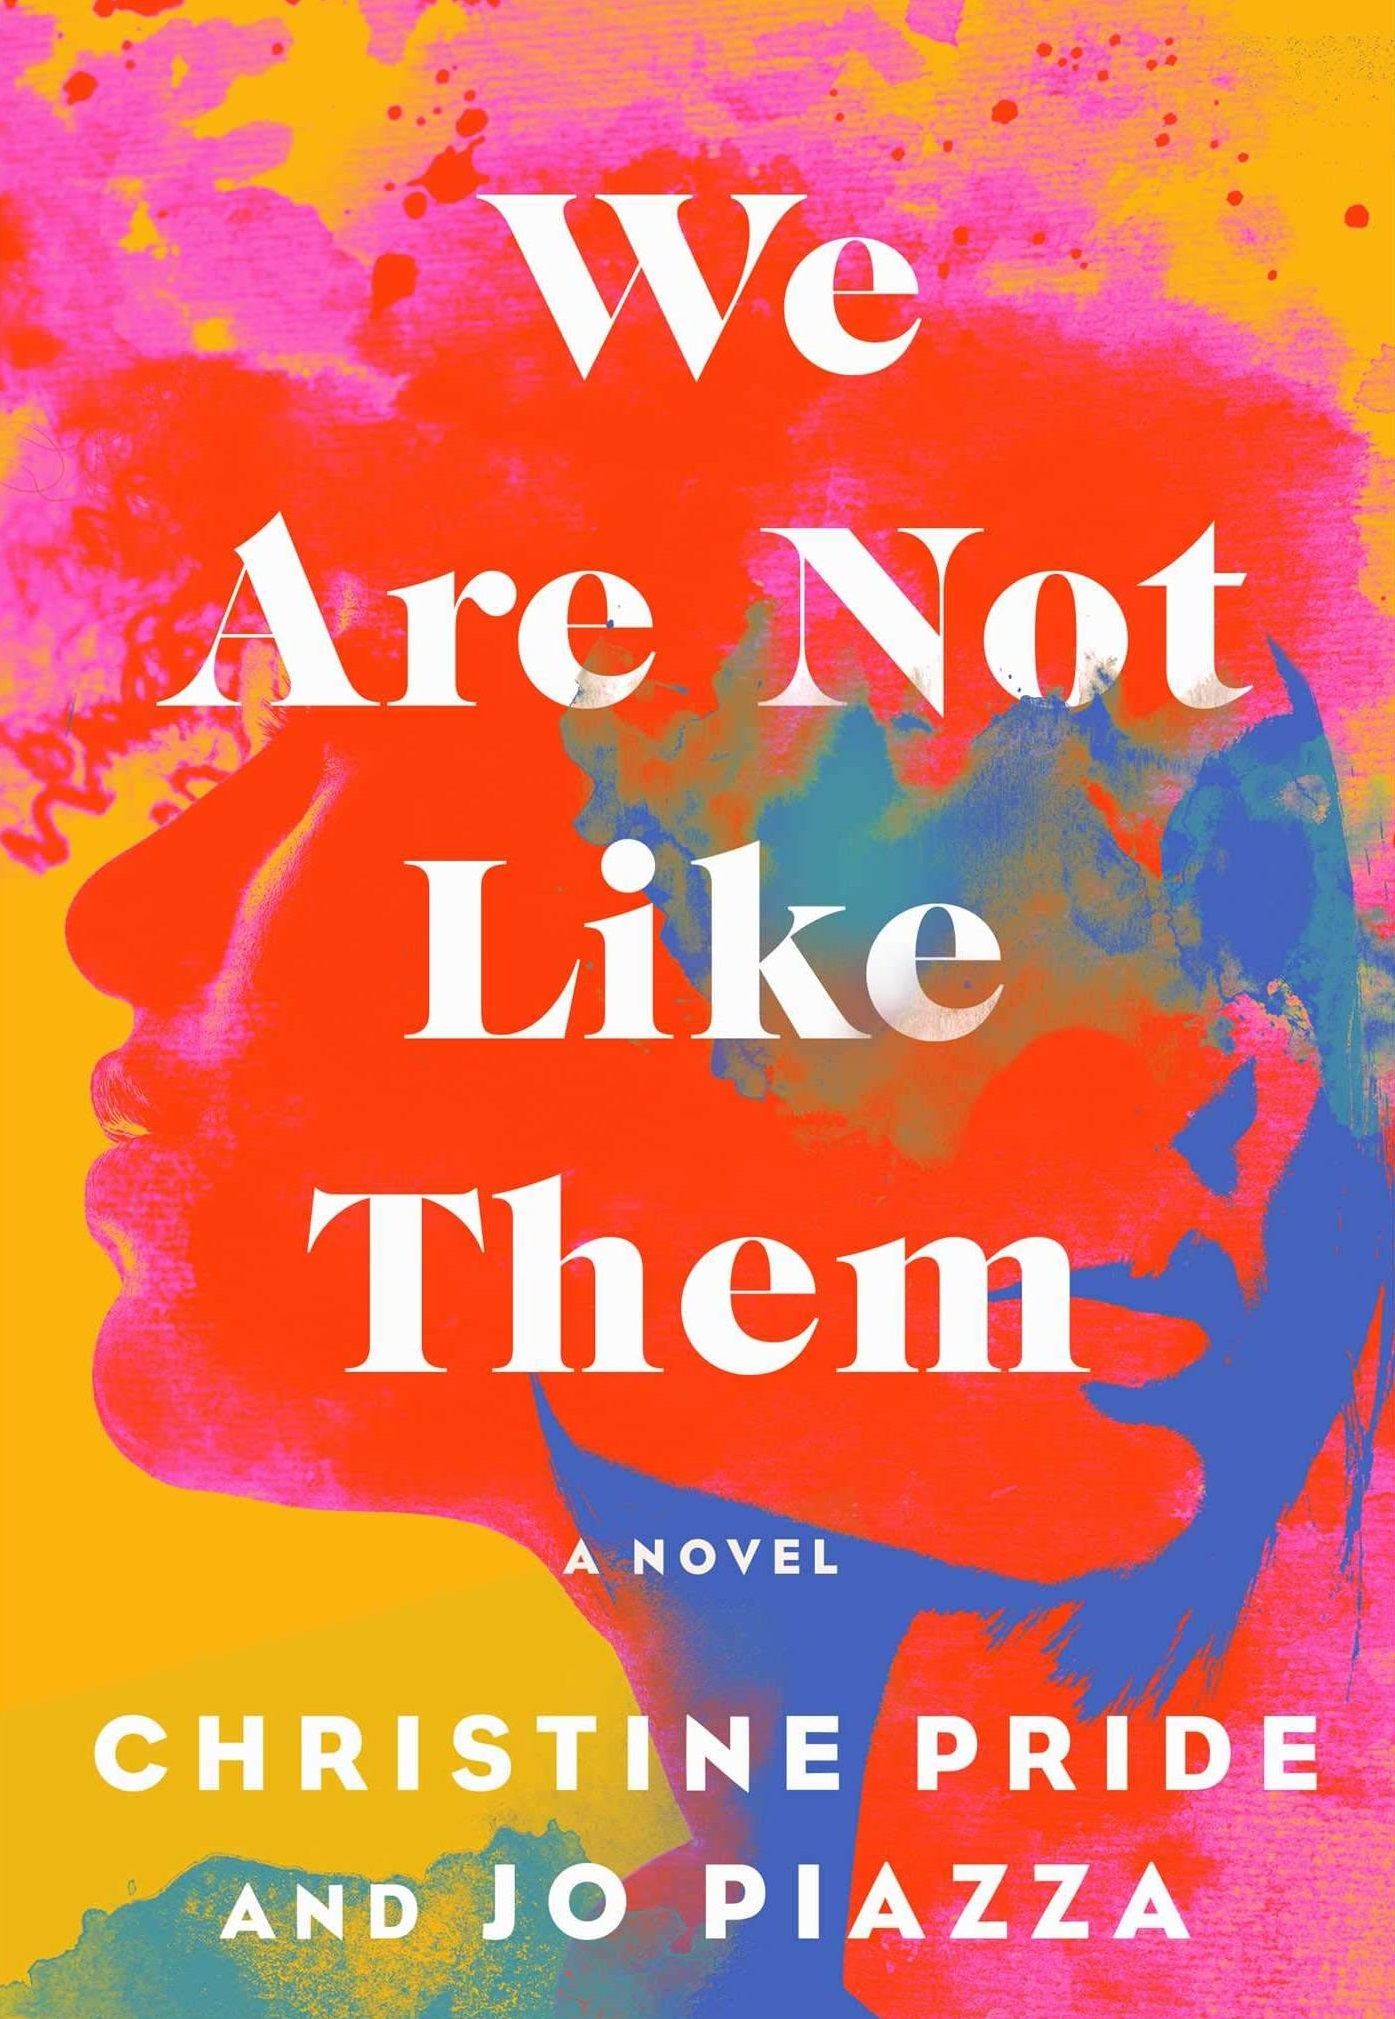 Cover of We Are Not Like Them by Christine Pride and Jo Piazza